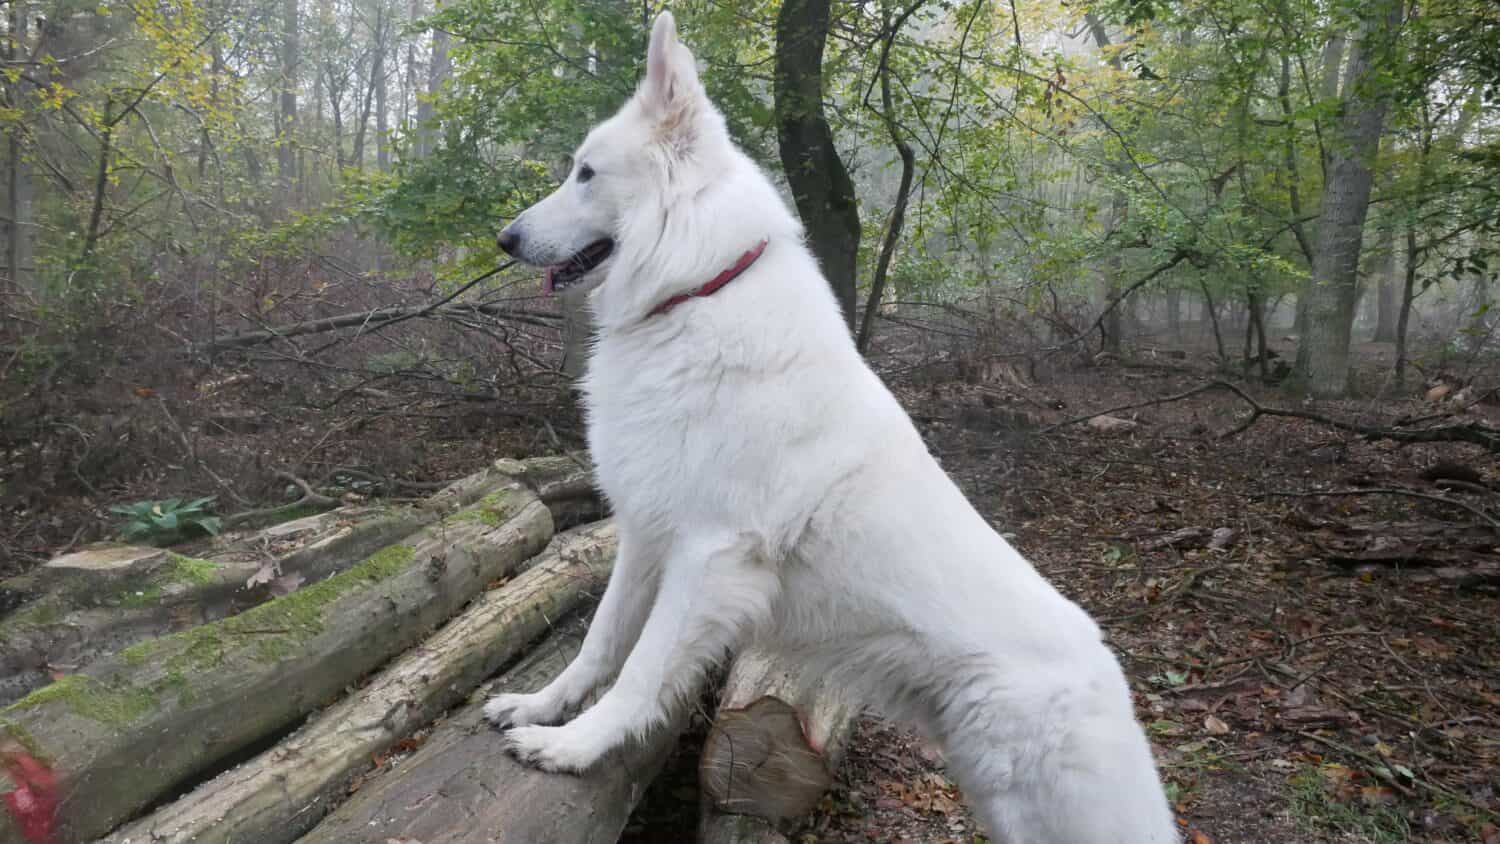 White dog (White German Shepherd, race Berger Blanc Suisse) stands with front paws on a stack of logs in the middle of the autumn forest